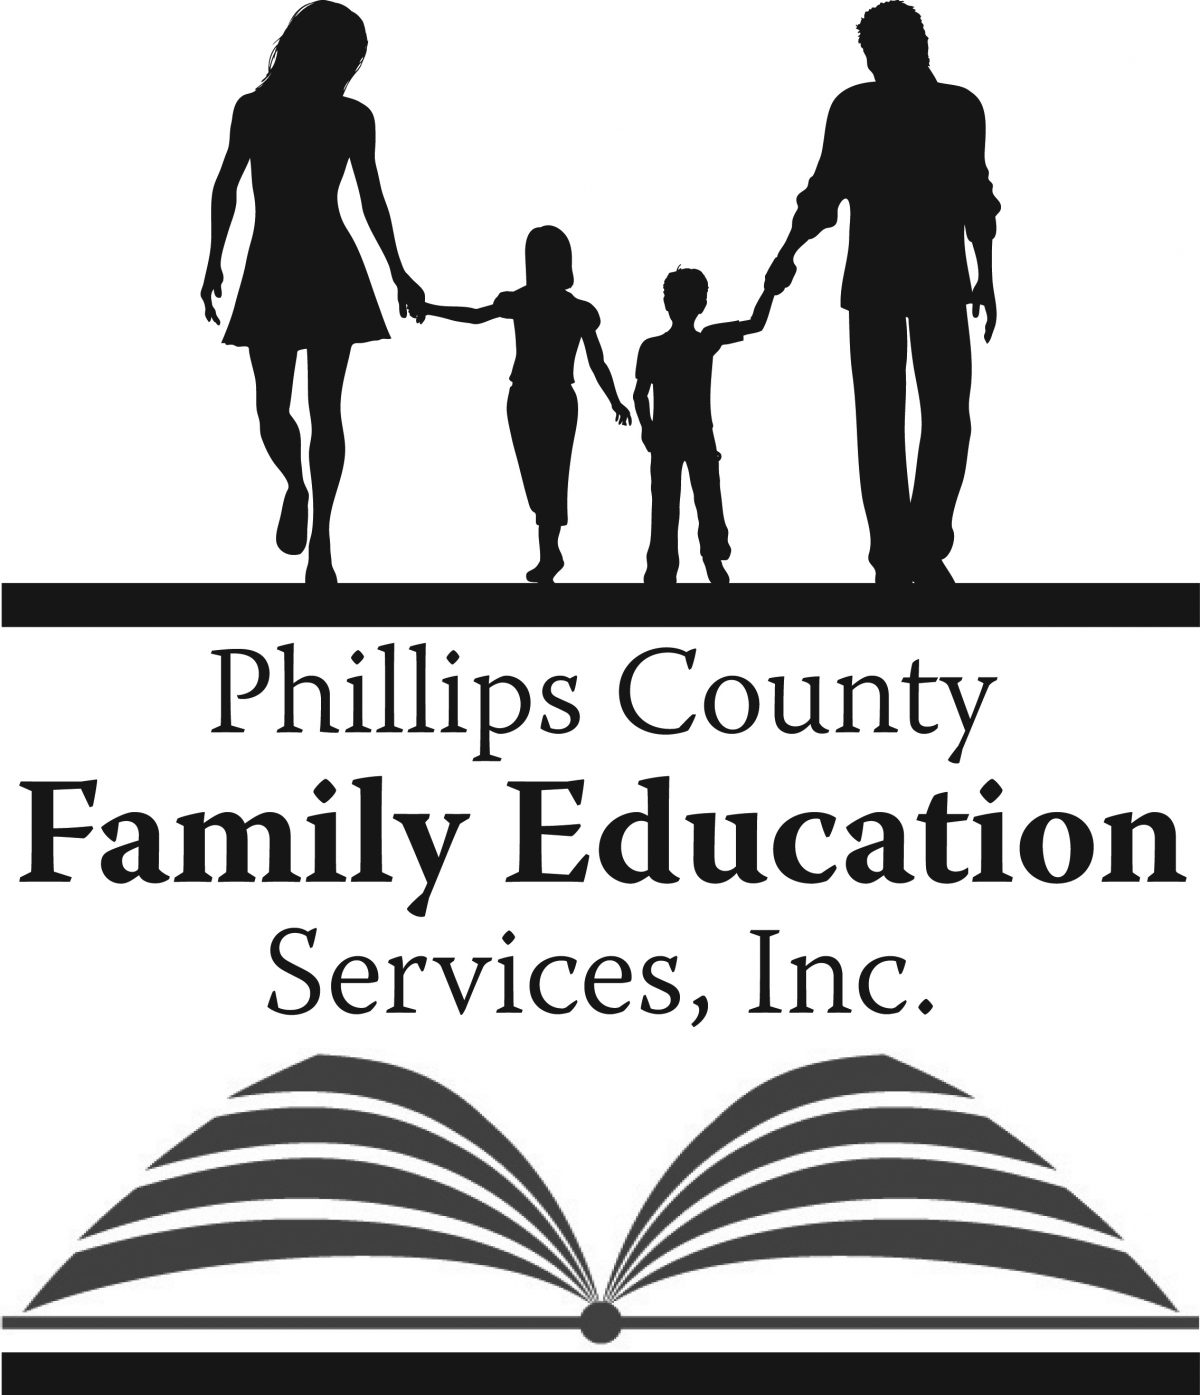 Phillips County Family Education Services: We want